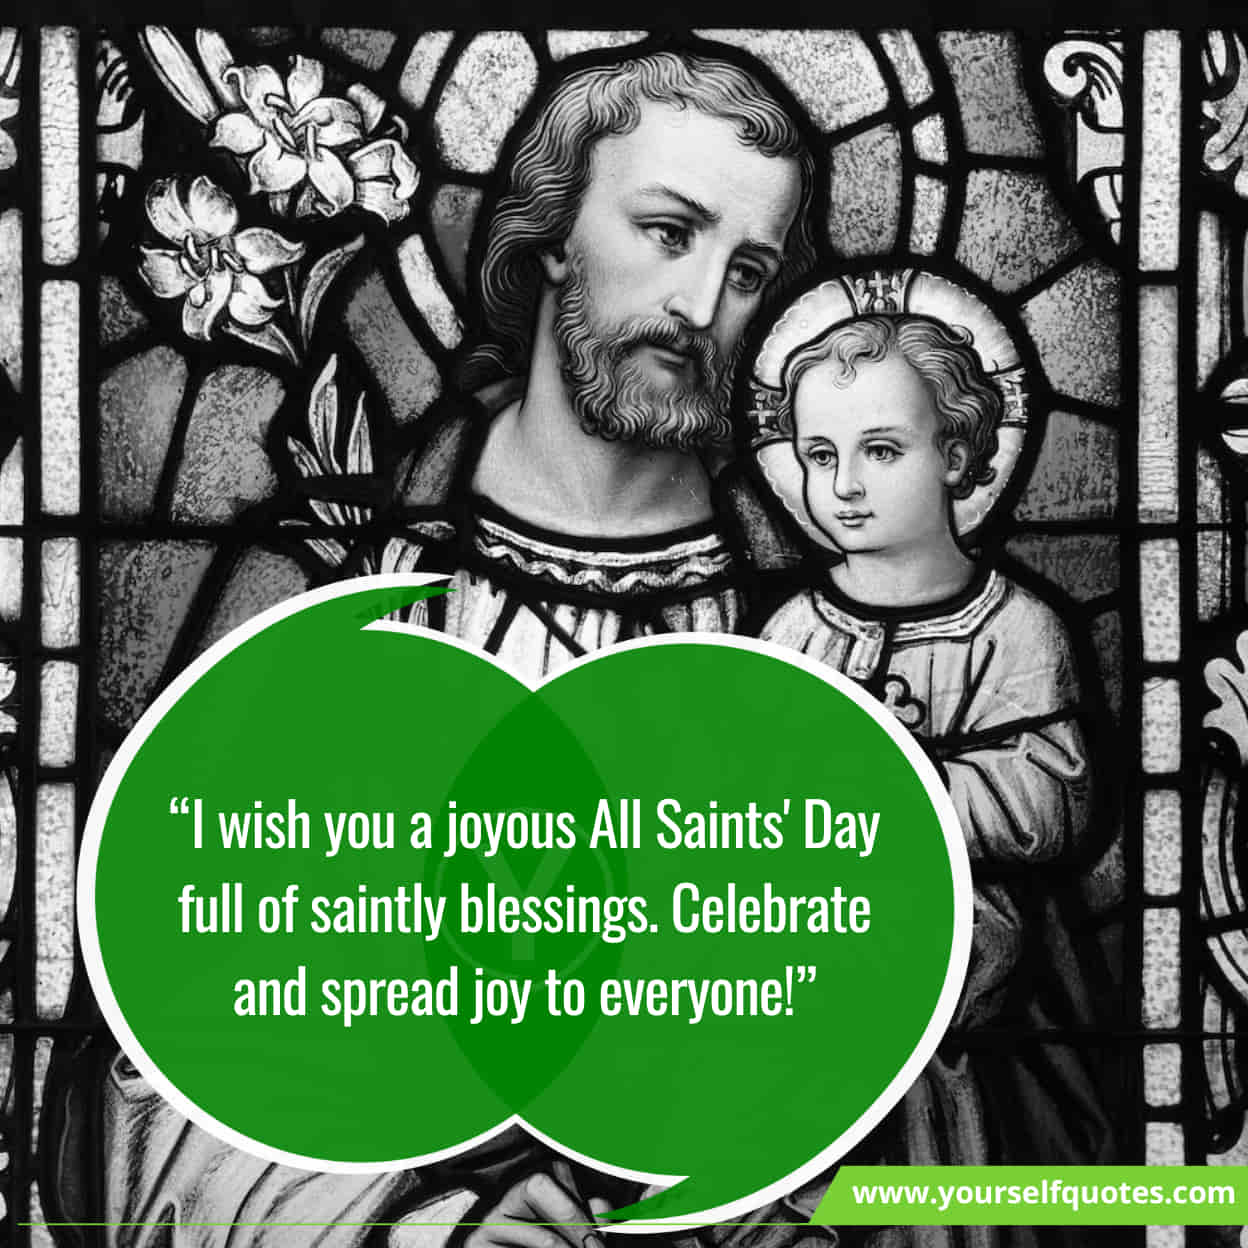 Happy All Saints Day Wishes, Messages, Quotes For Loved Ones